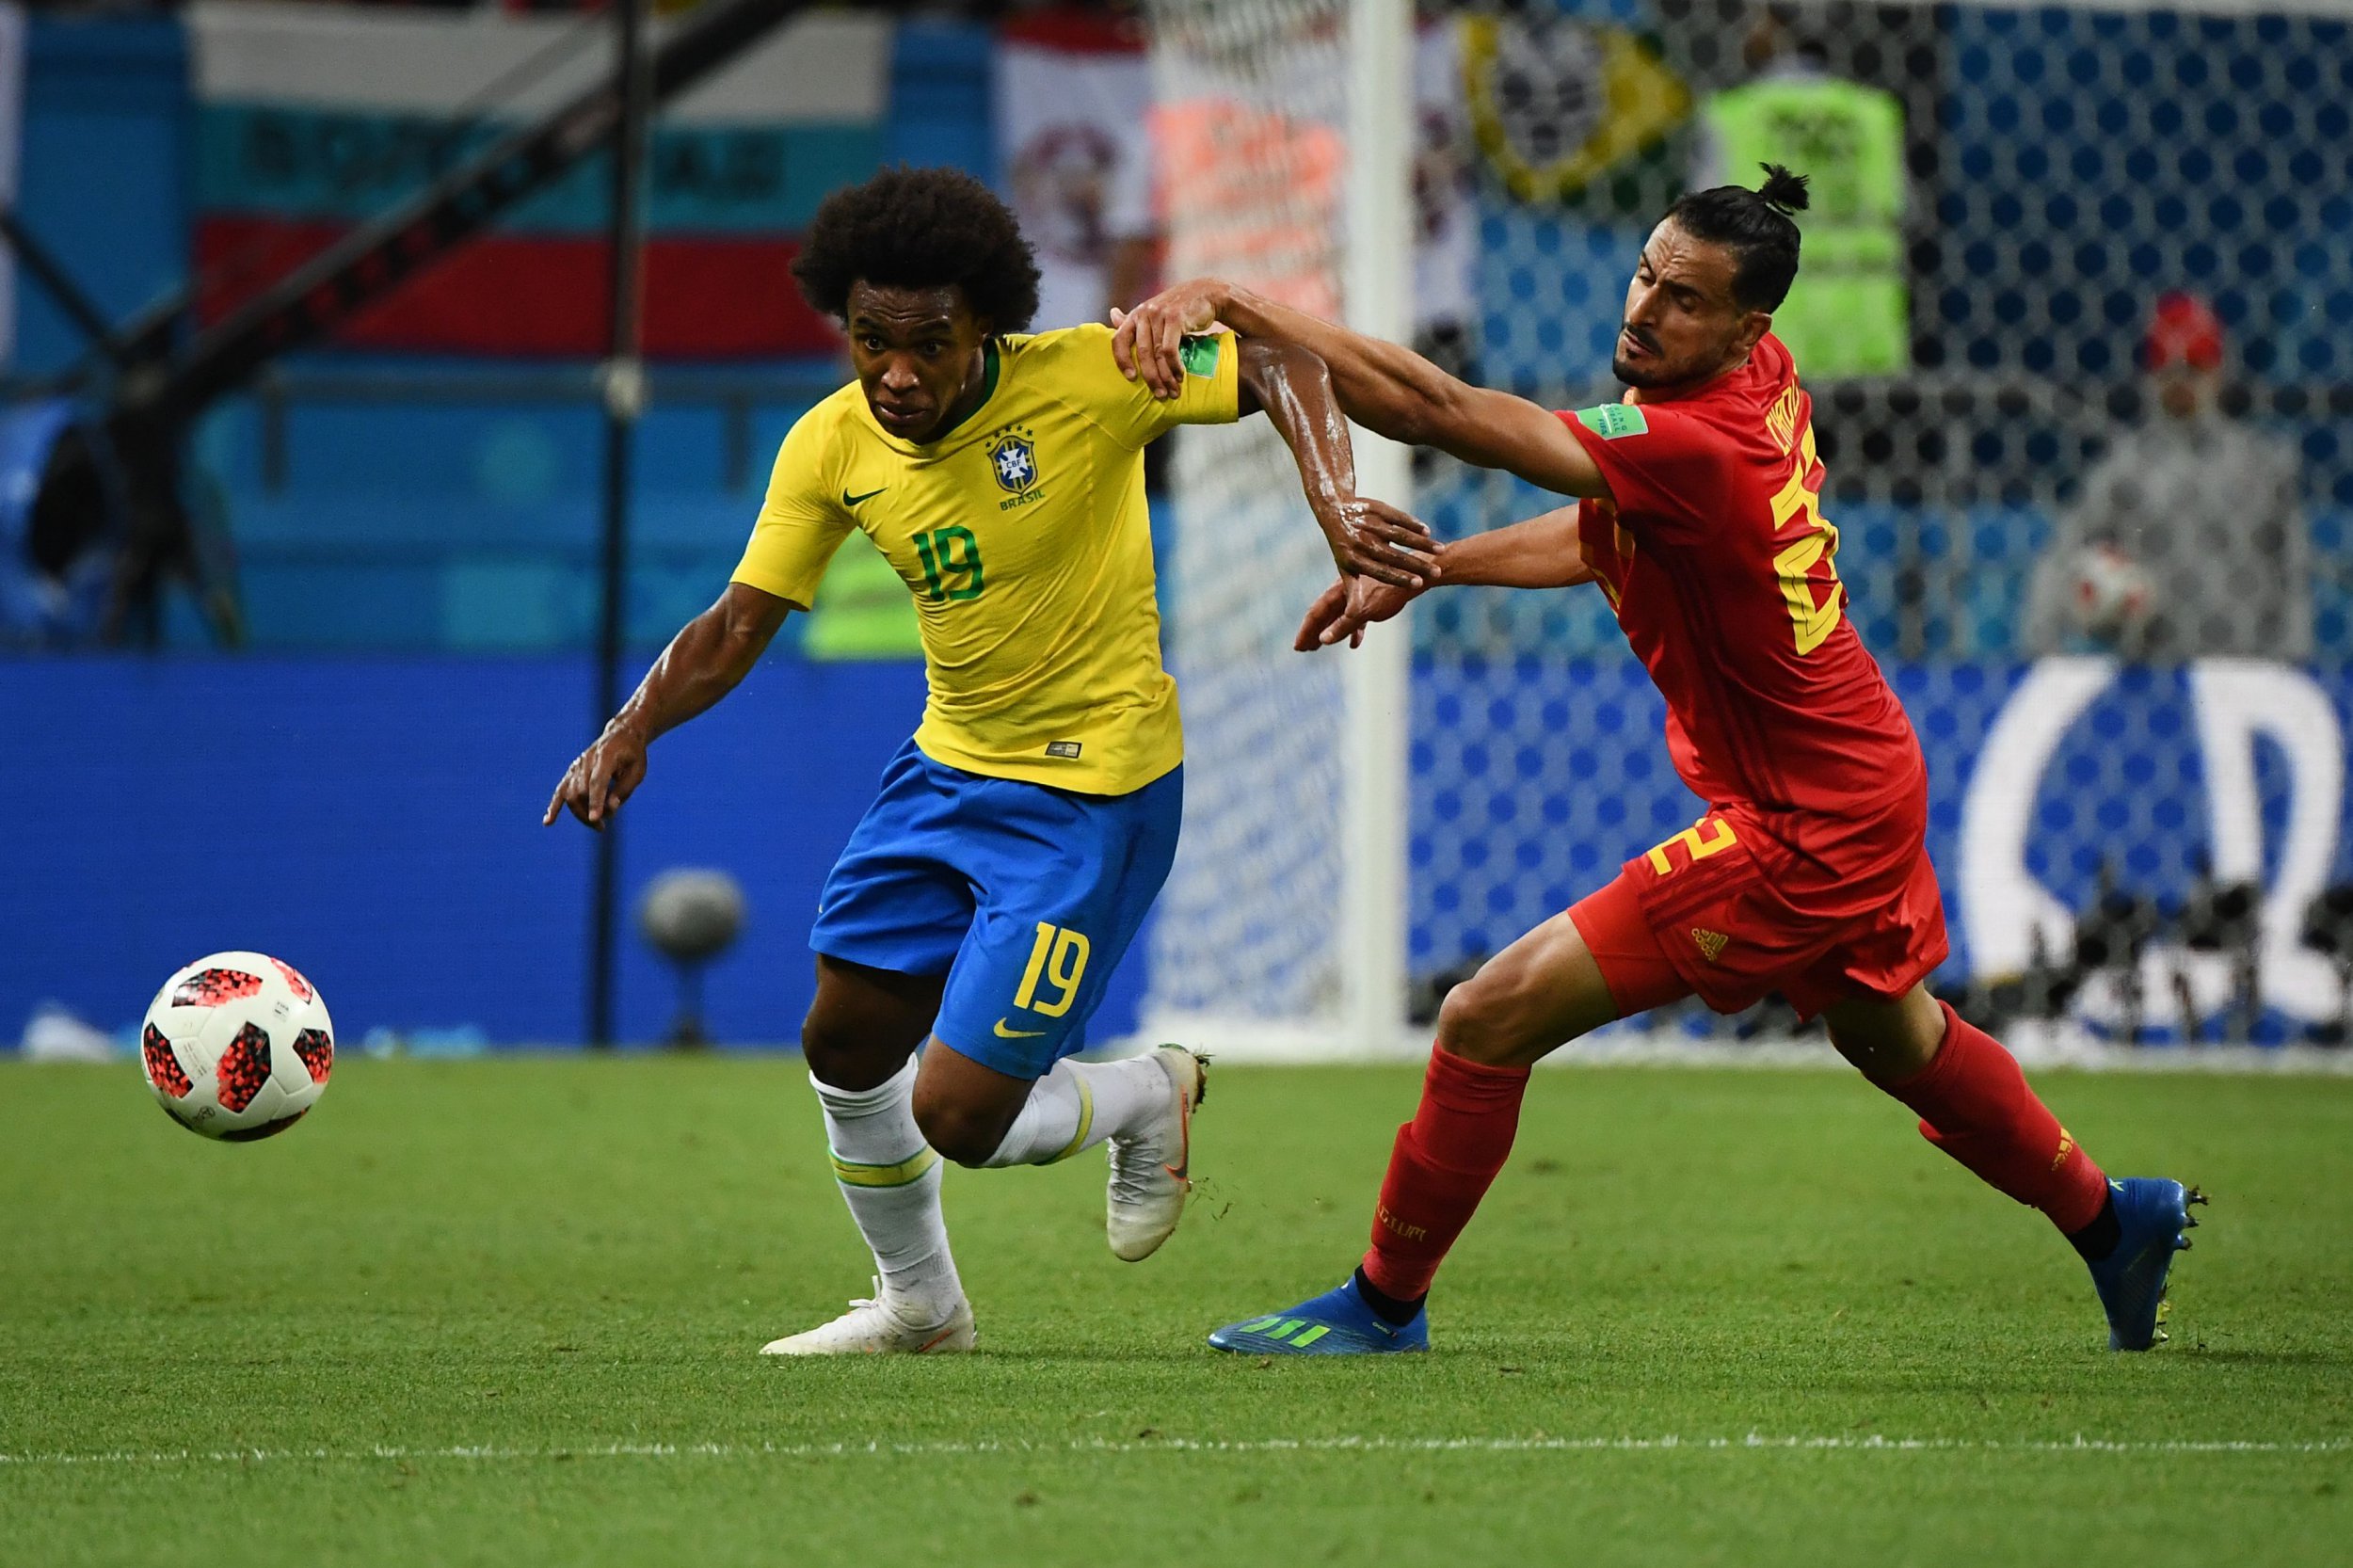 Manchester United confident Willian transfer will be completed after Brazil's World Cup exit